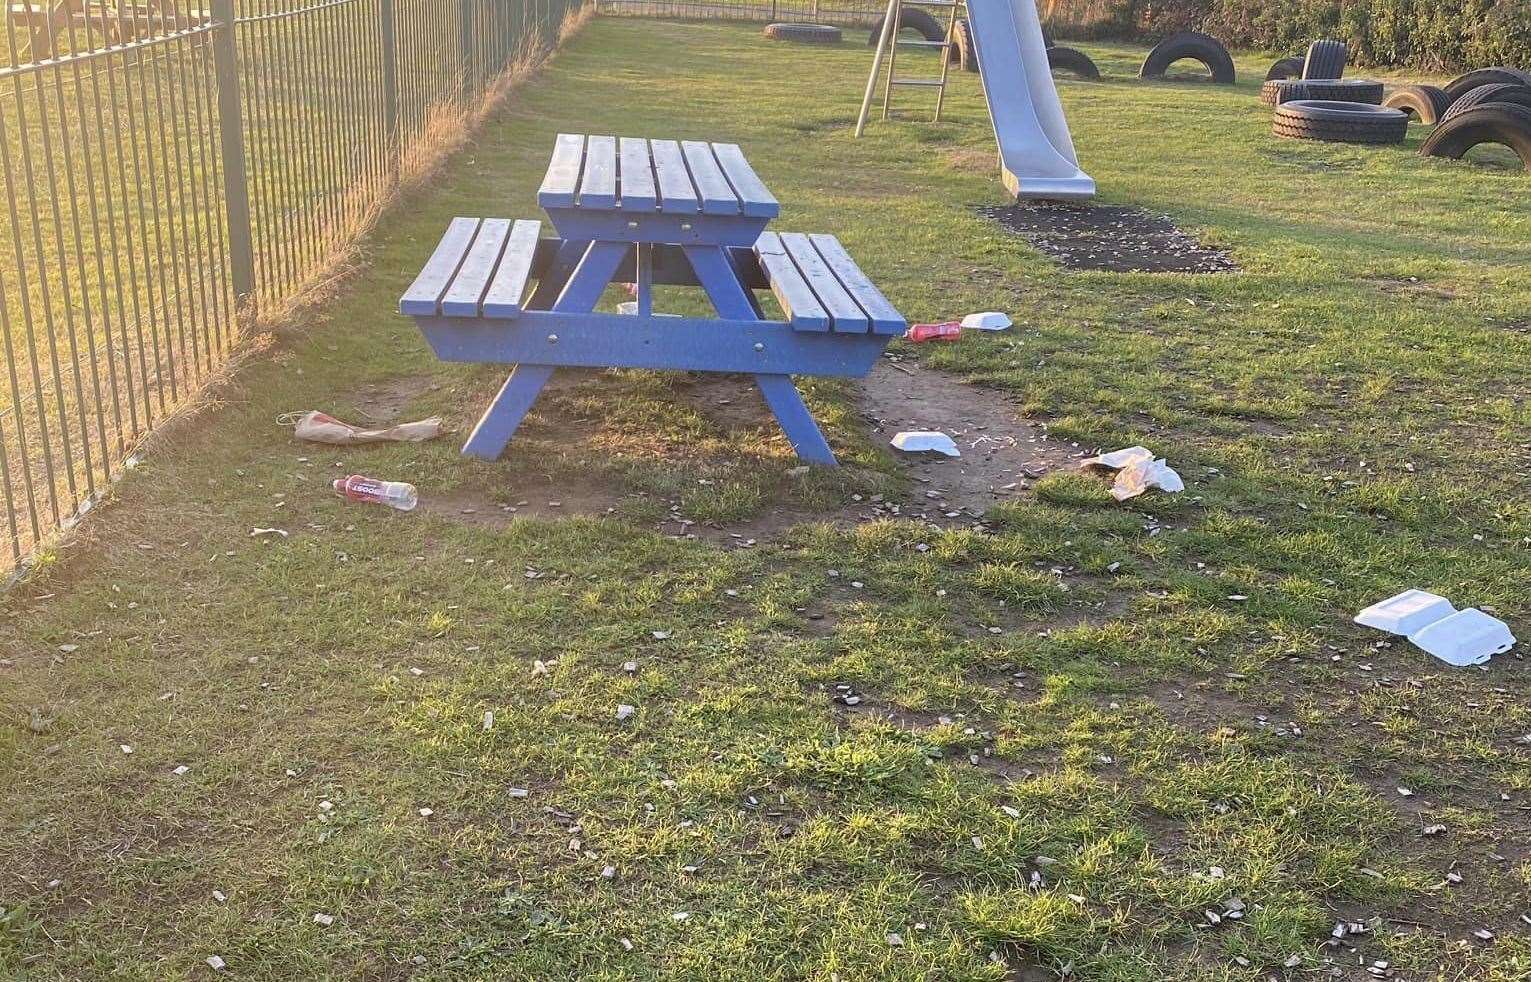 Mrs Blundell was shocked to see the park in such a poor condition